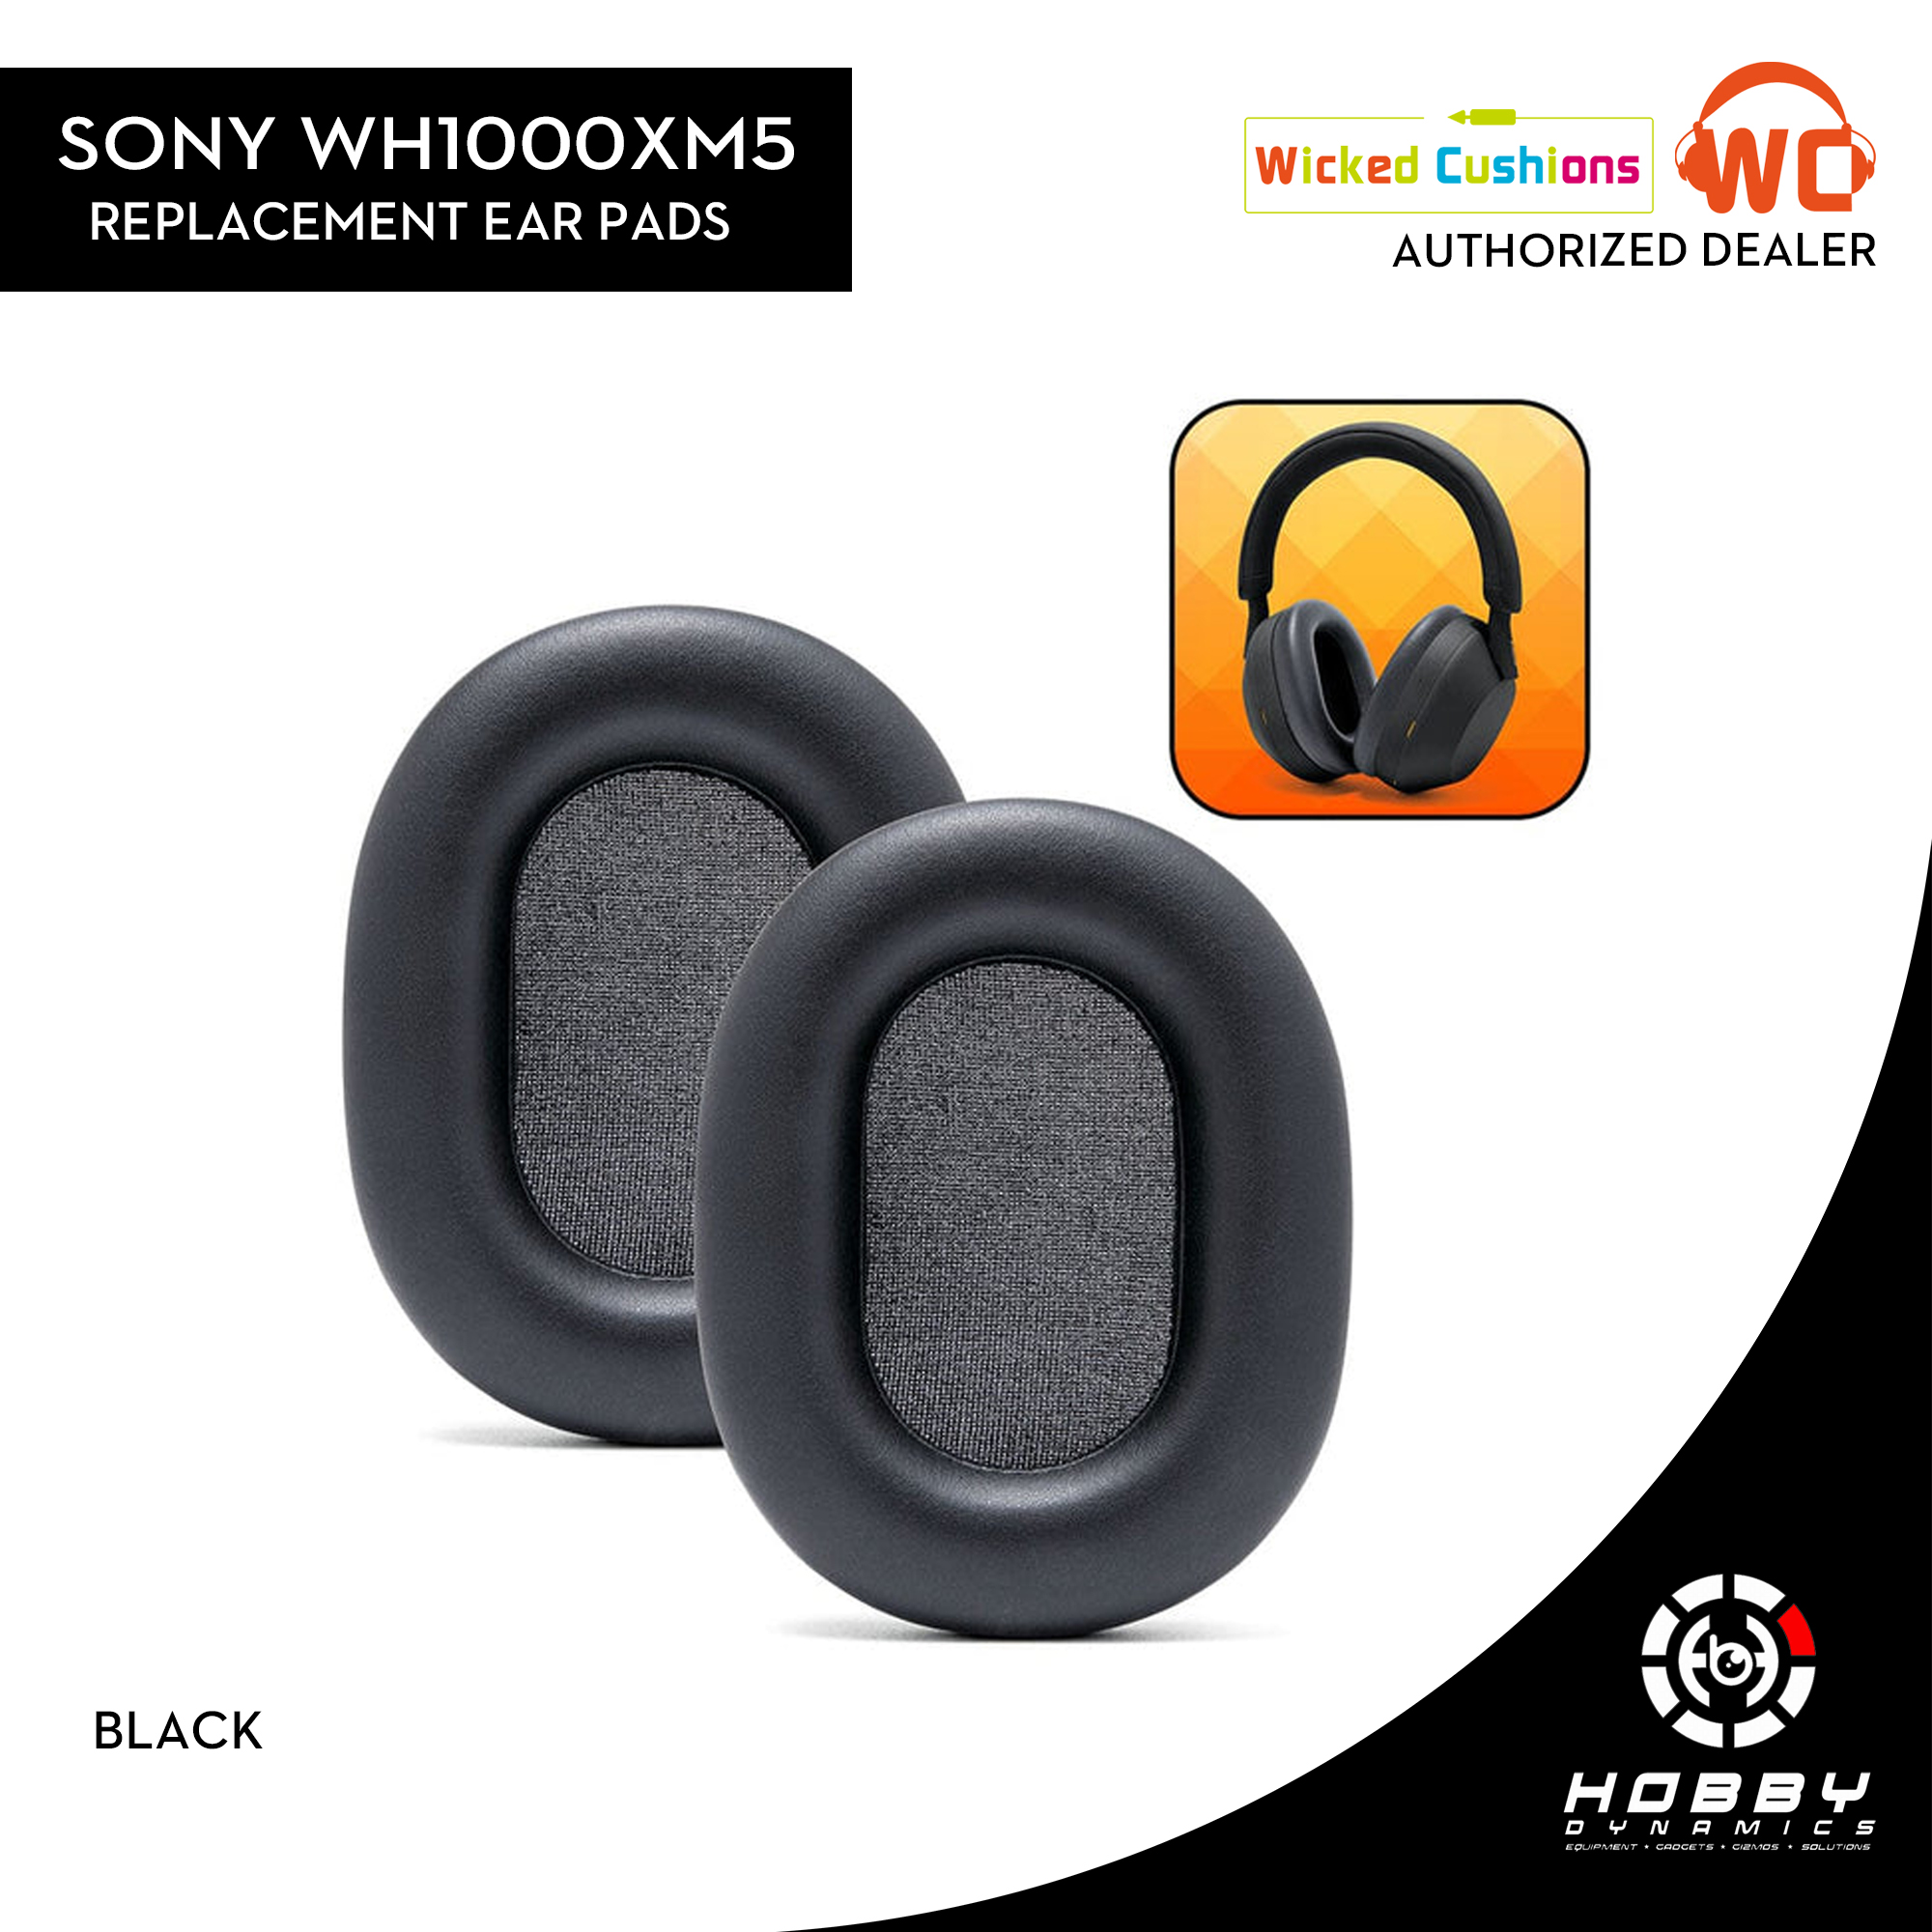 Upgraded Sony XM5 Replacement Ear Pads – Wicked Cushions